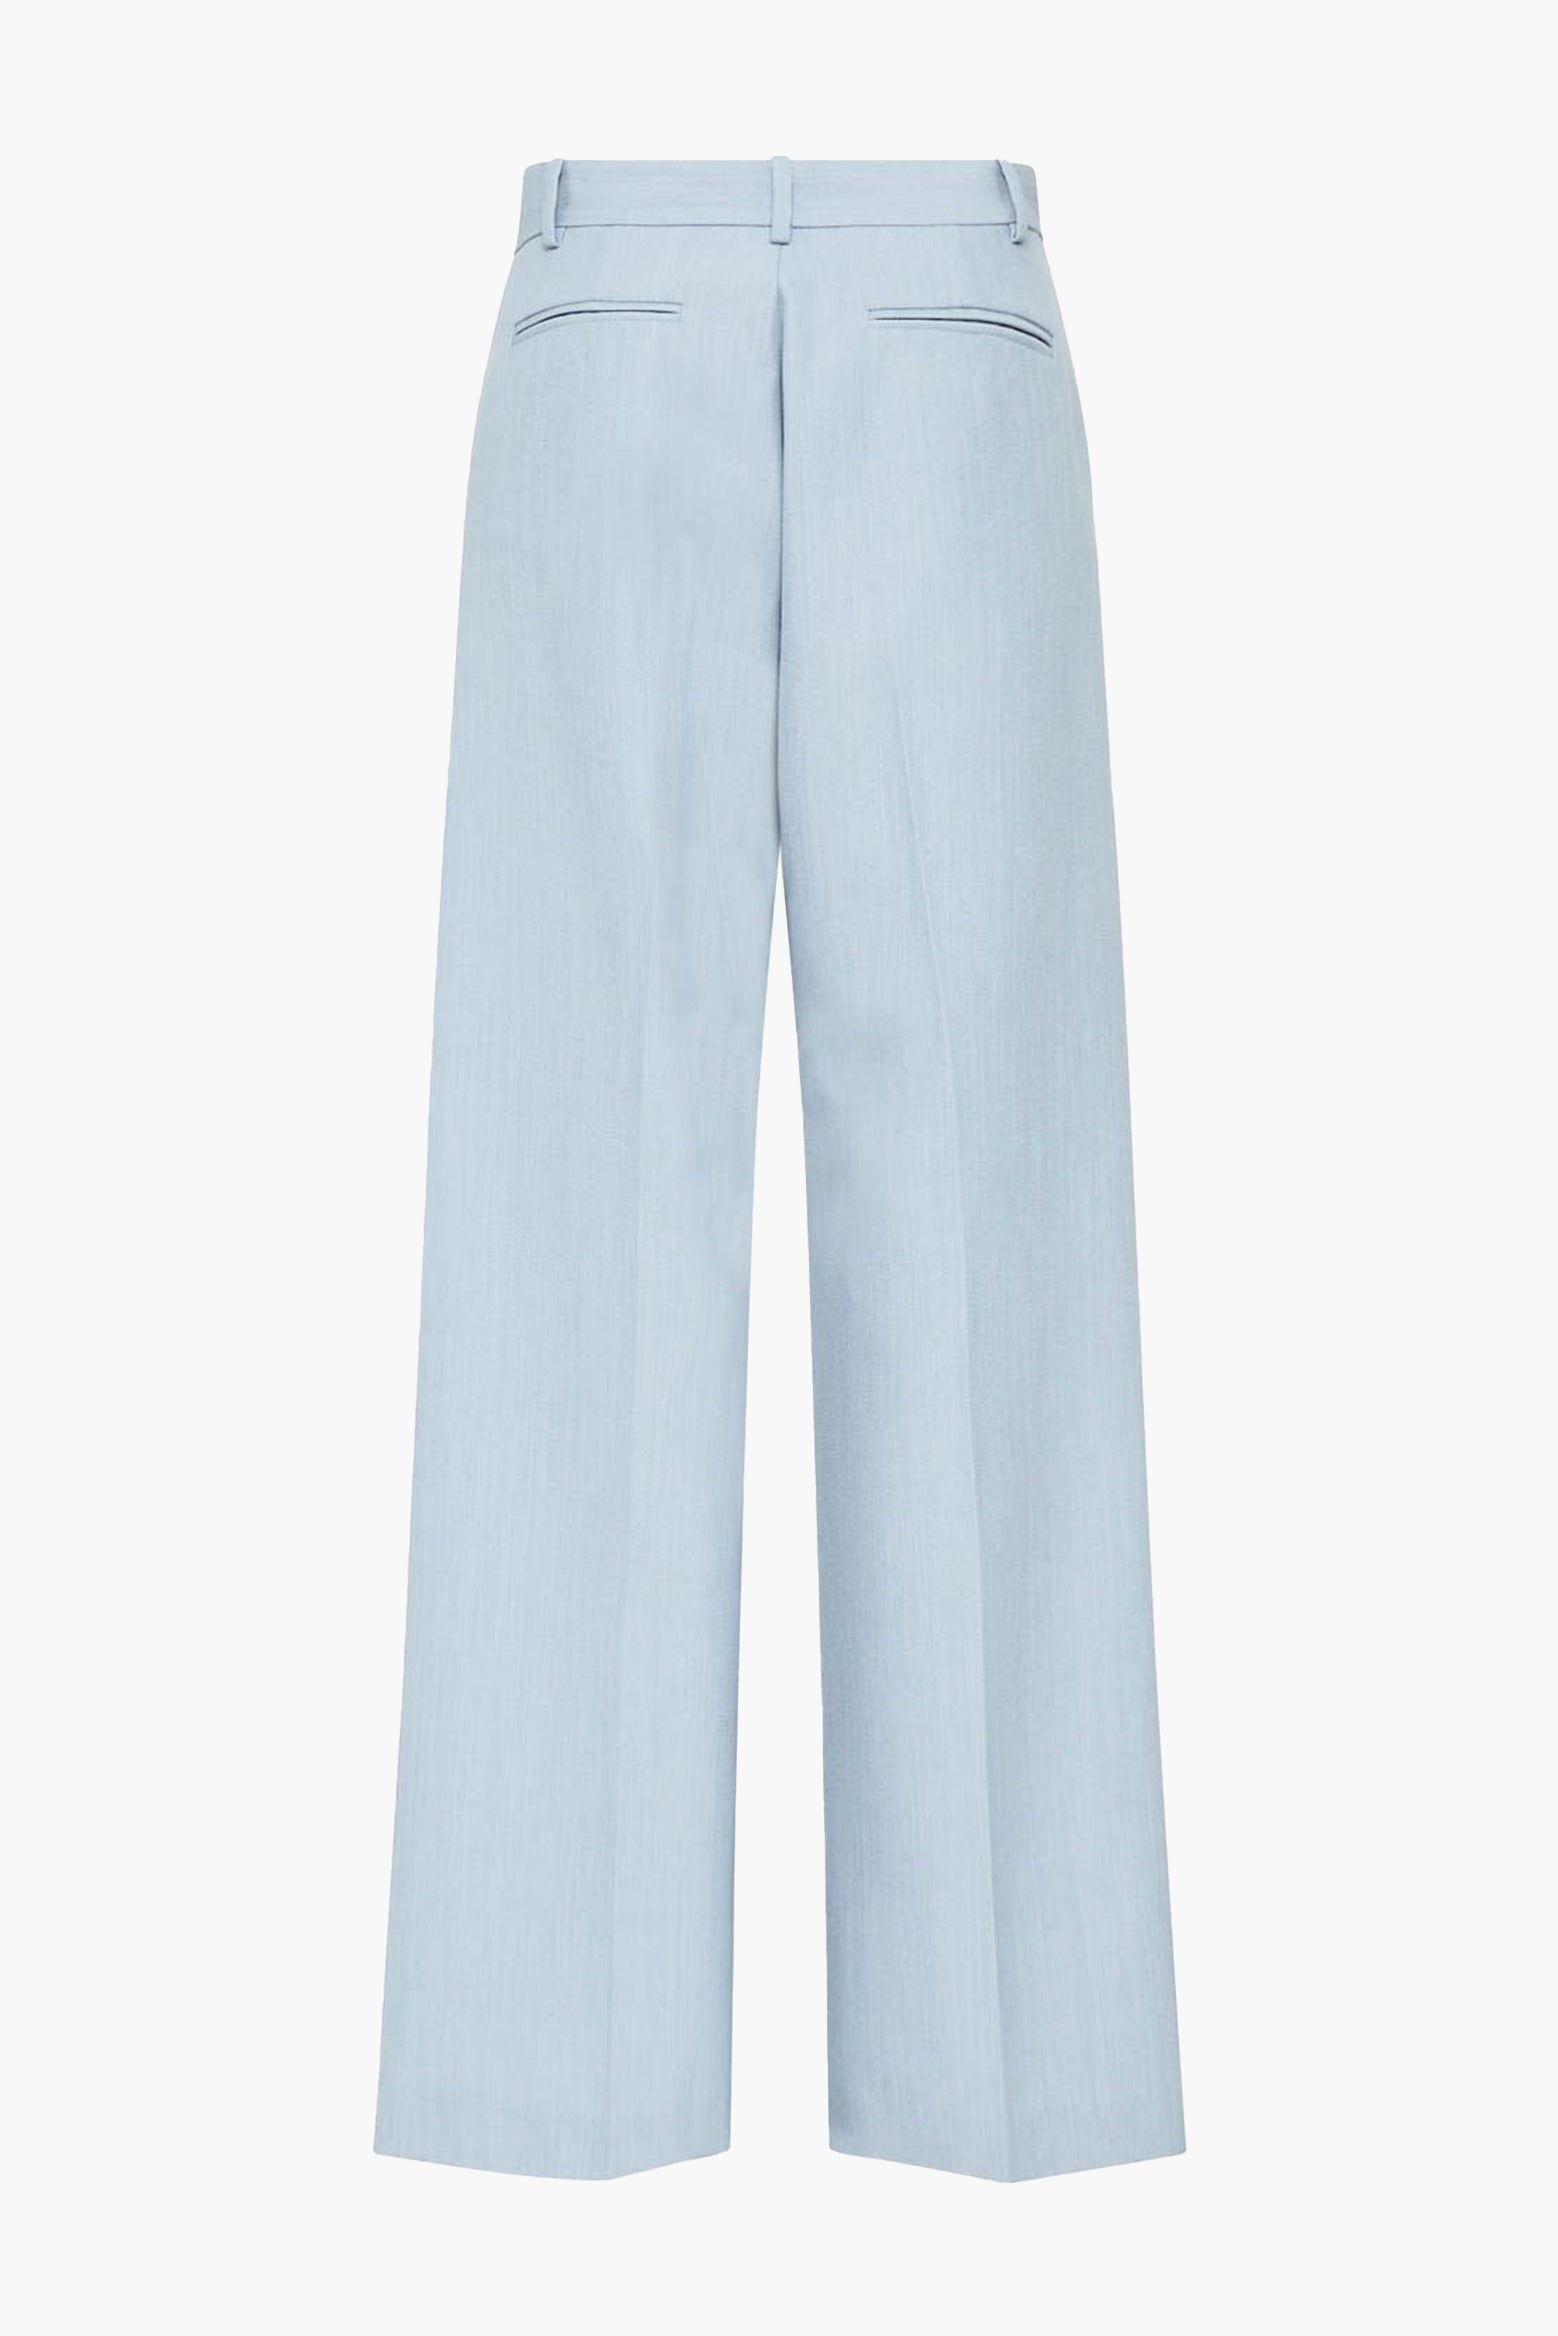 The ST. AGNI Carter Trousers  in Stone Blue from The New Trend.